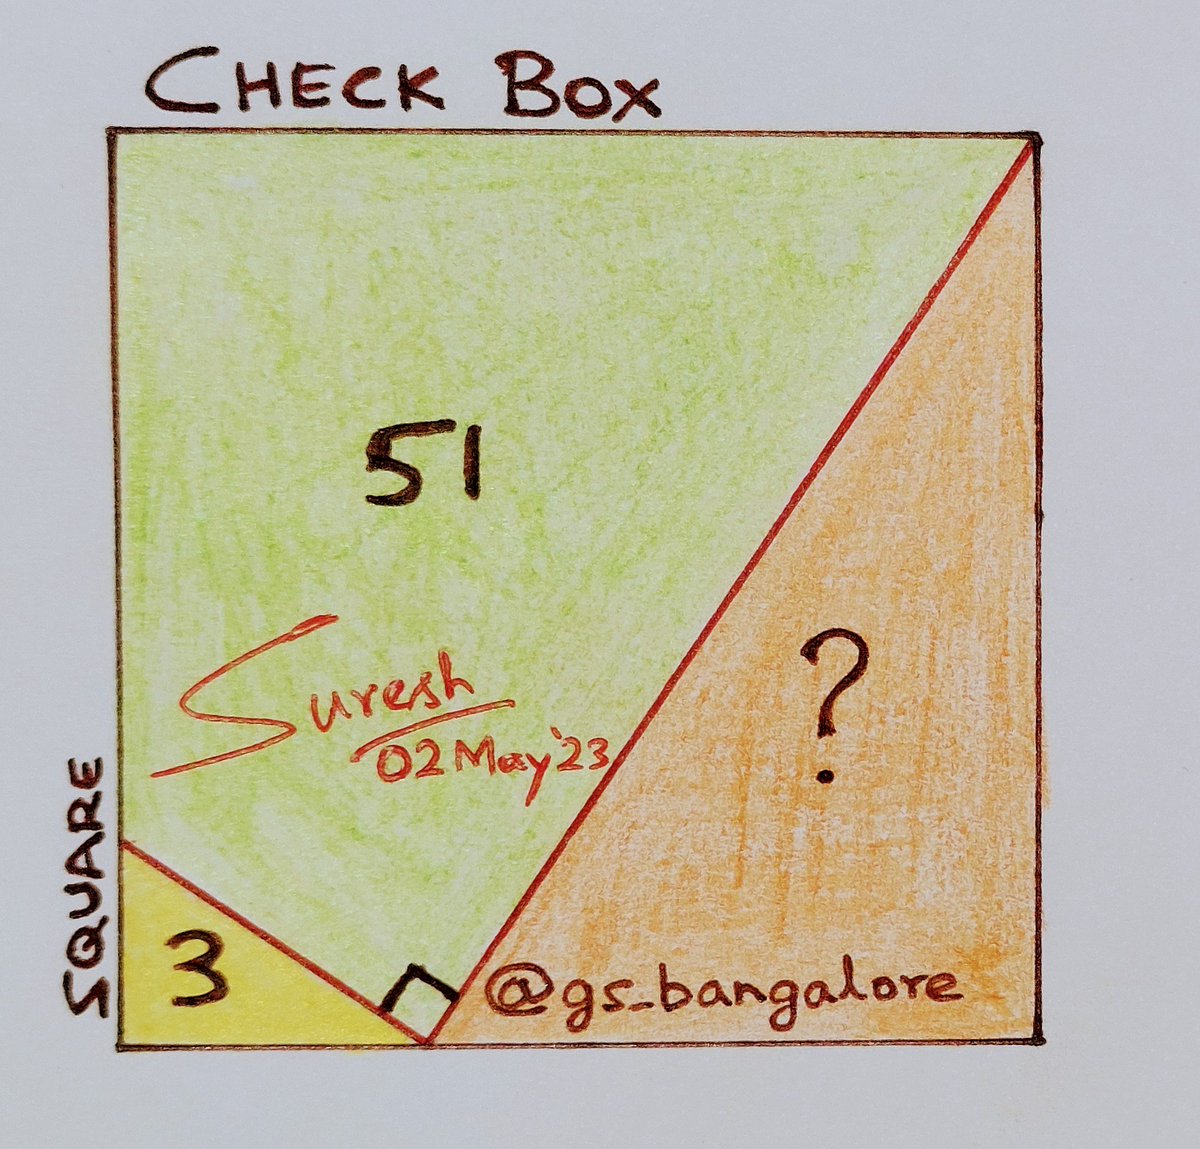 Check Box

Perpendiculars dividing a square into three areas. Orangle = ?

#square #triangle #geometry #geometrique #similarity #puzzle #Pythagoras #study #riddle #thinking #logic #reasoning #today #mathteachers #math #teacher #mathematics #Algebra #highschool #students #learning